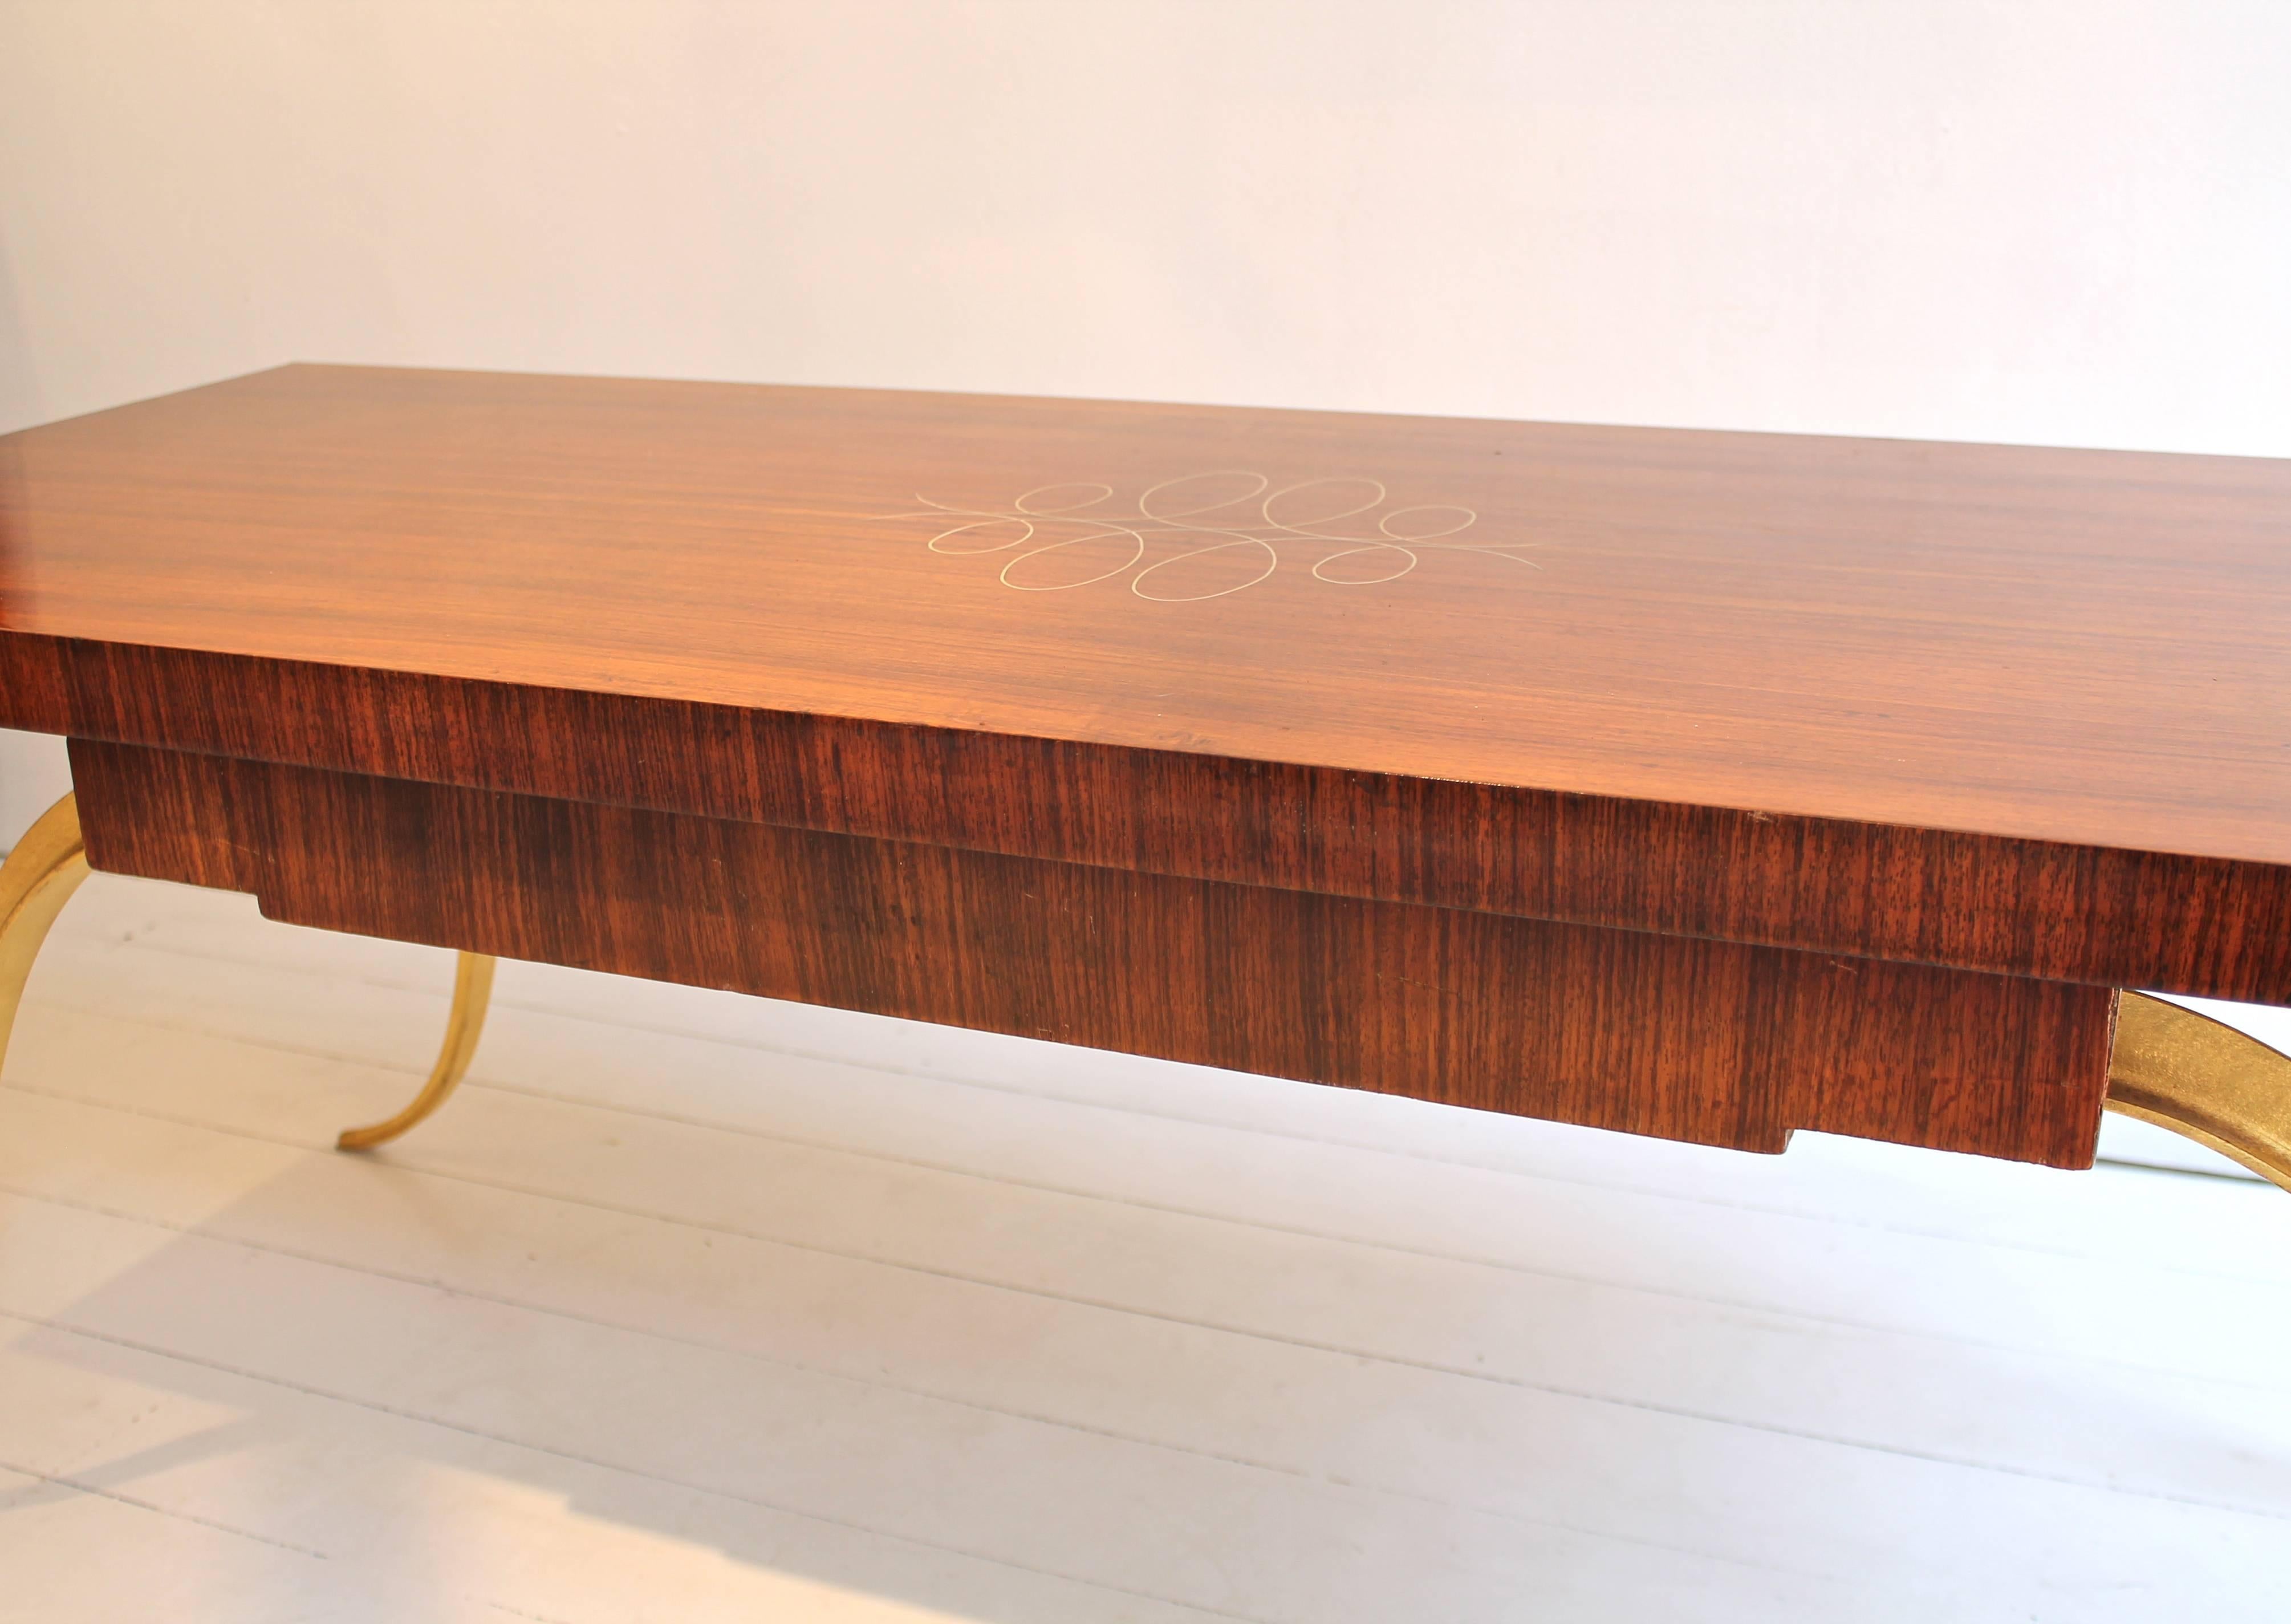 1930s French Art Deco coffee table.
In rosewood, bone marquetry and gilded wrought iron legs.